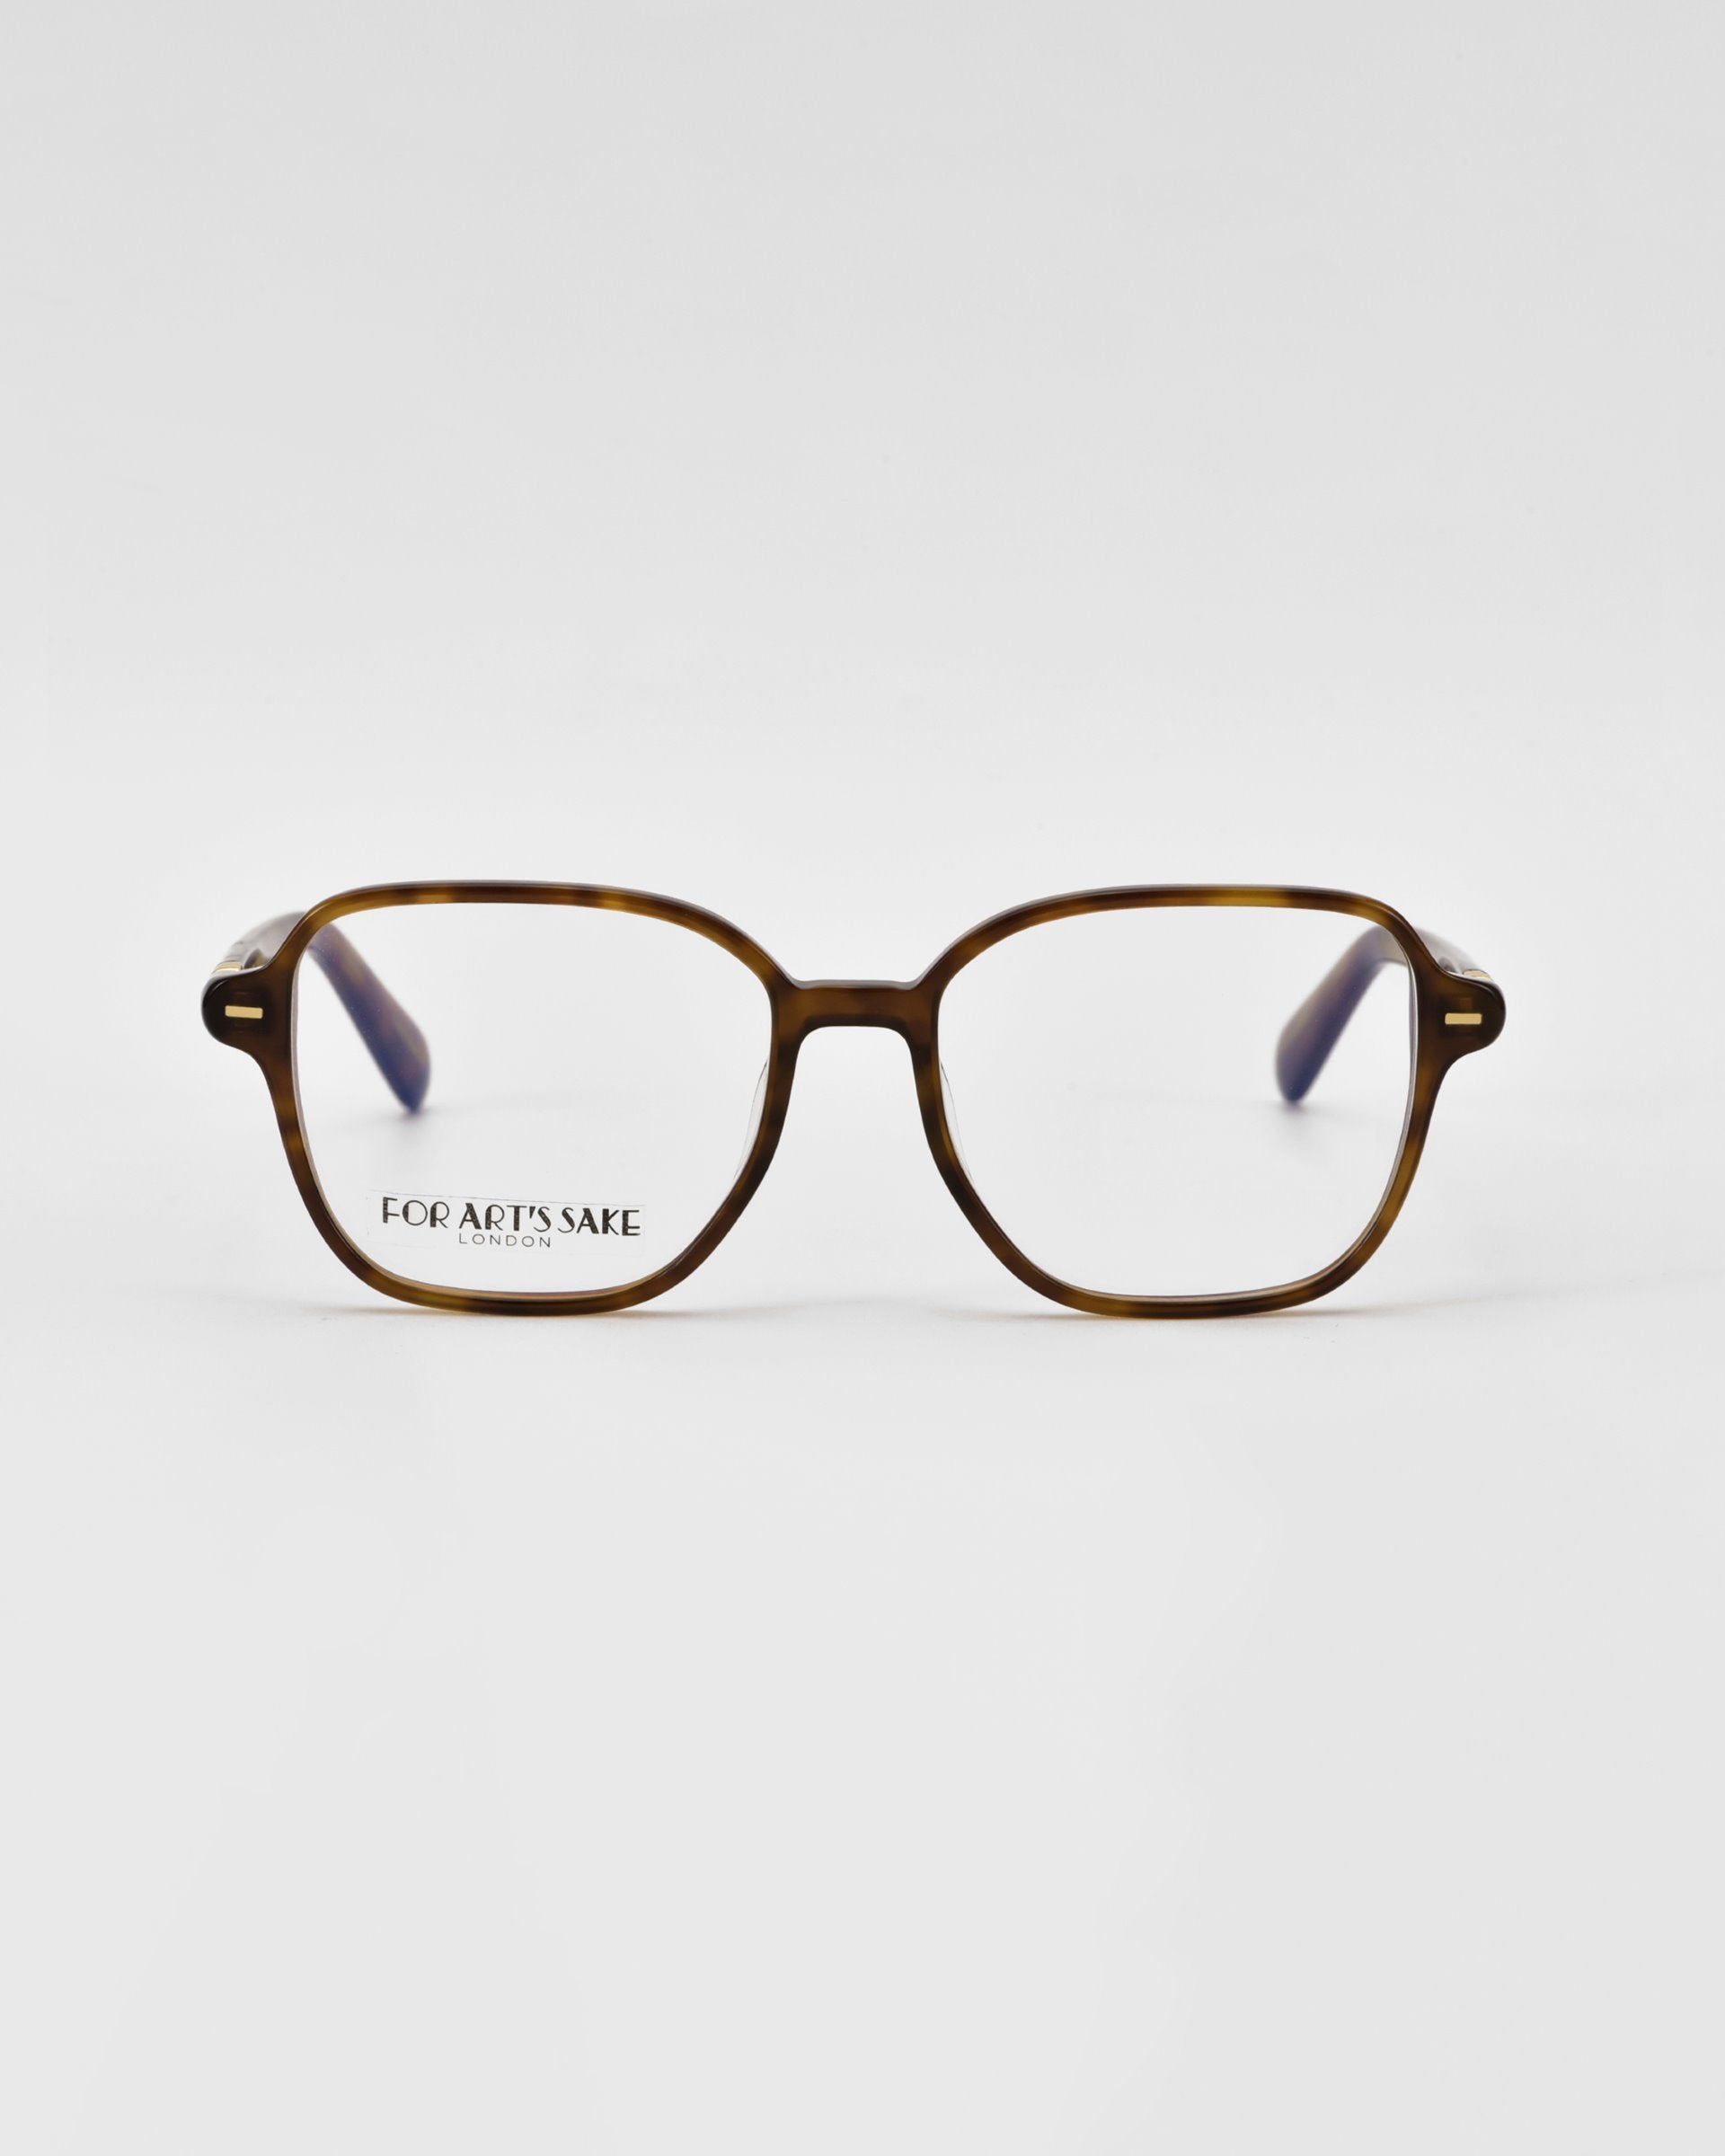 Charm Brown optical glasses displayed against a clean white background by For Art's Sake.